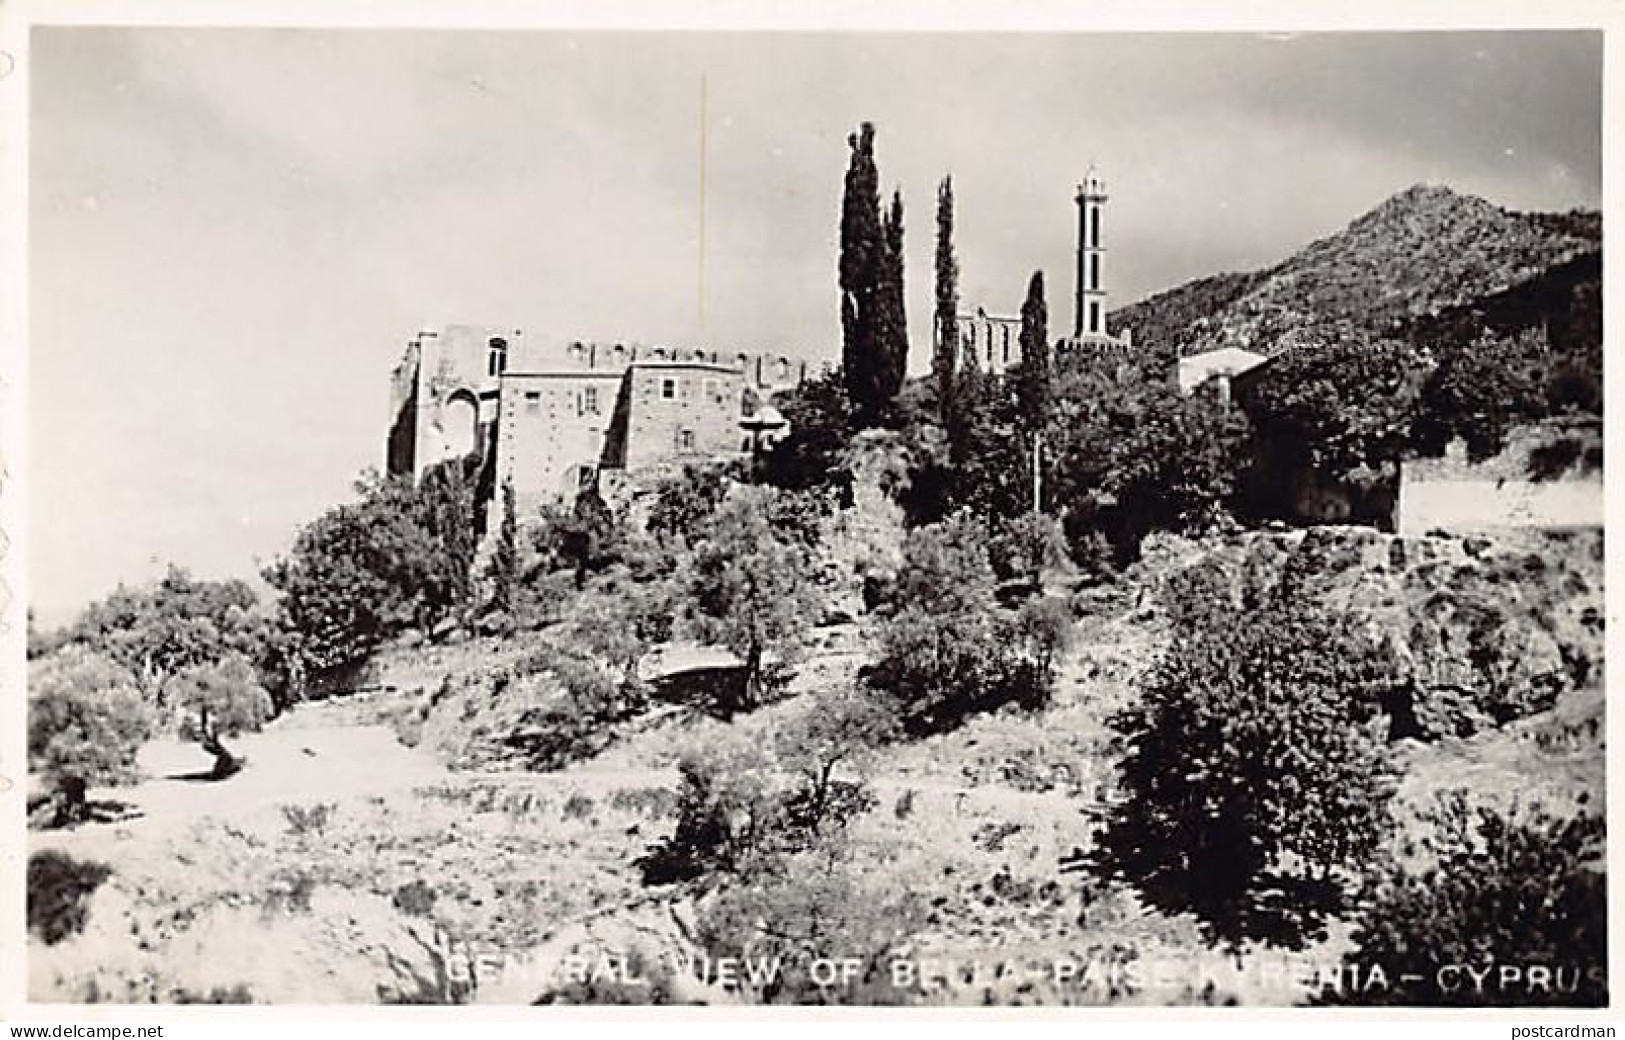 Cyprus - KYRENIA - General View Of Bellapais Abbey - REAL PHOTO - Publ. Unknown  - Zypern